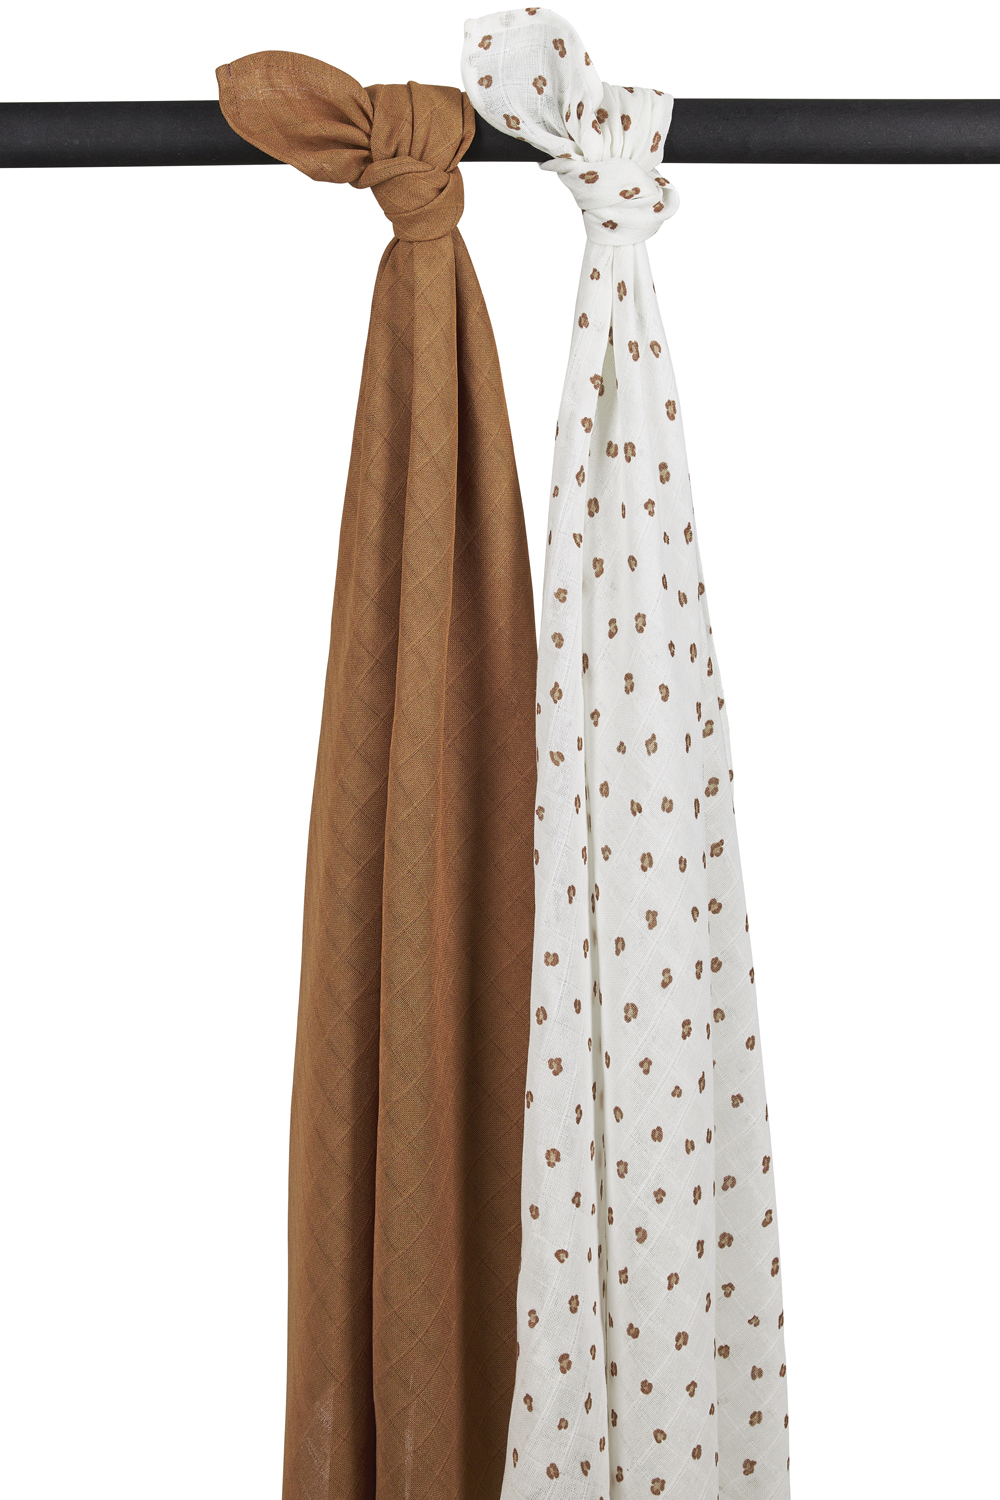 Swaddle 2-pack muslin Mini Panther - toffee - 120x120cm